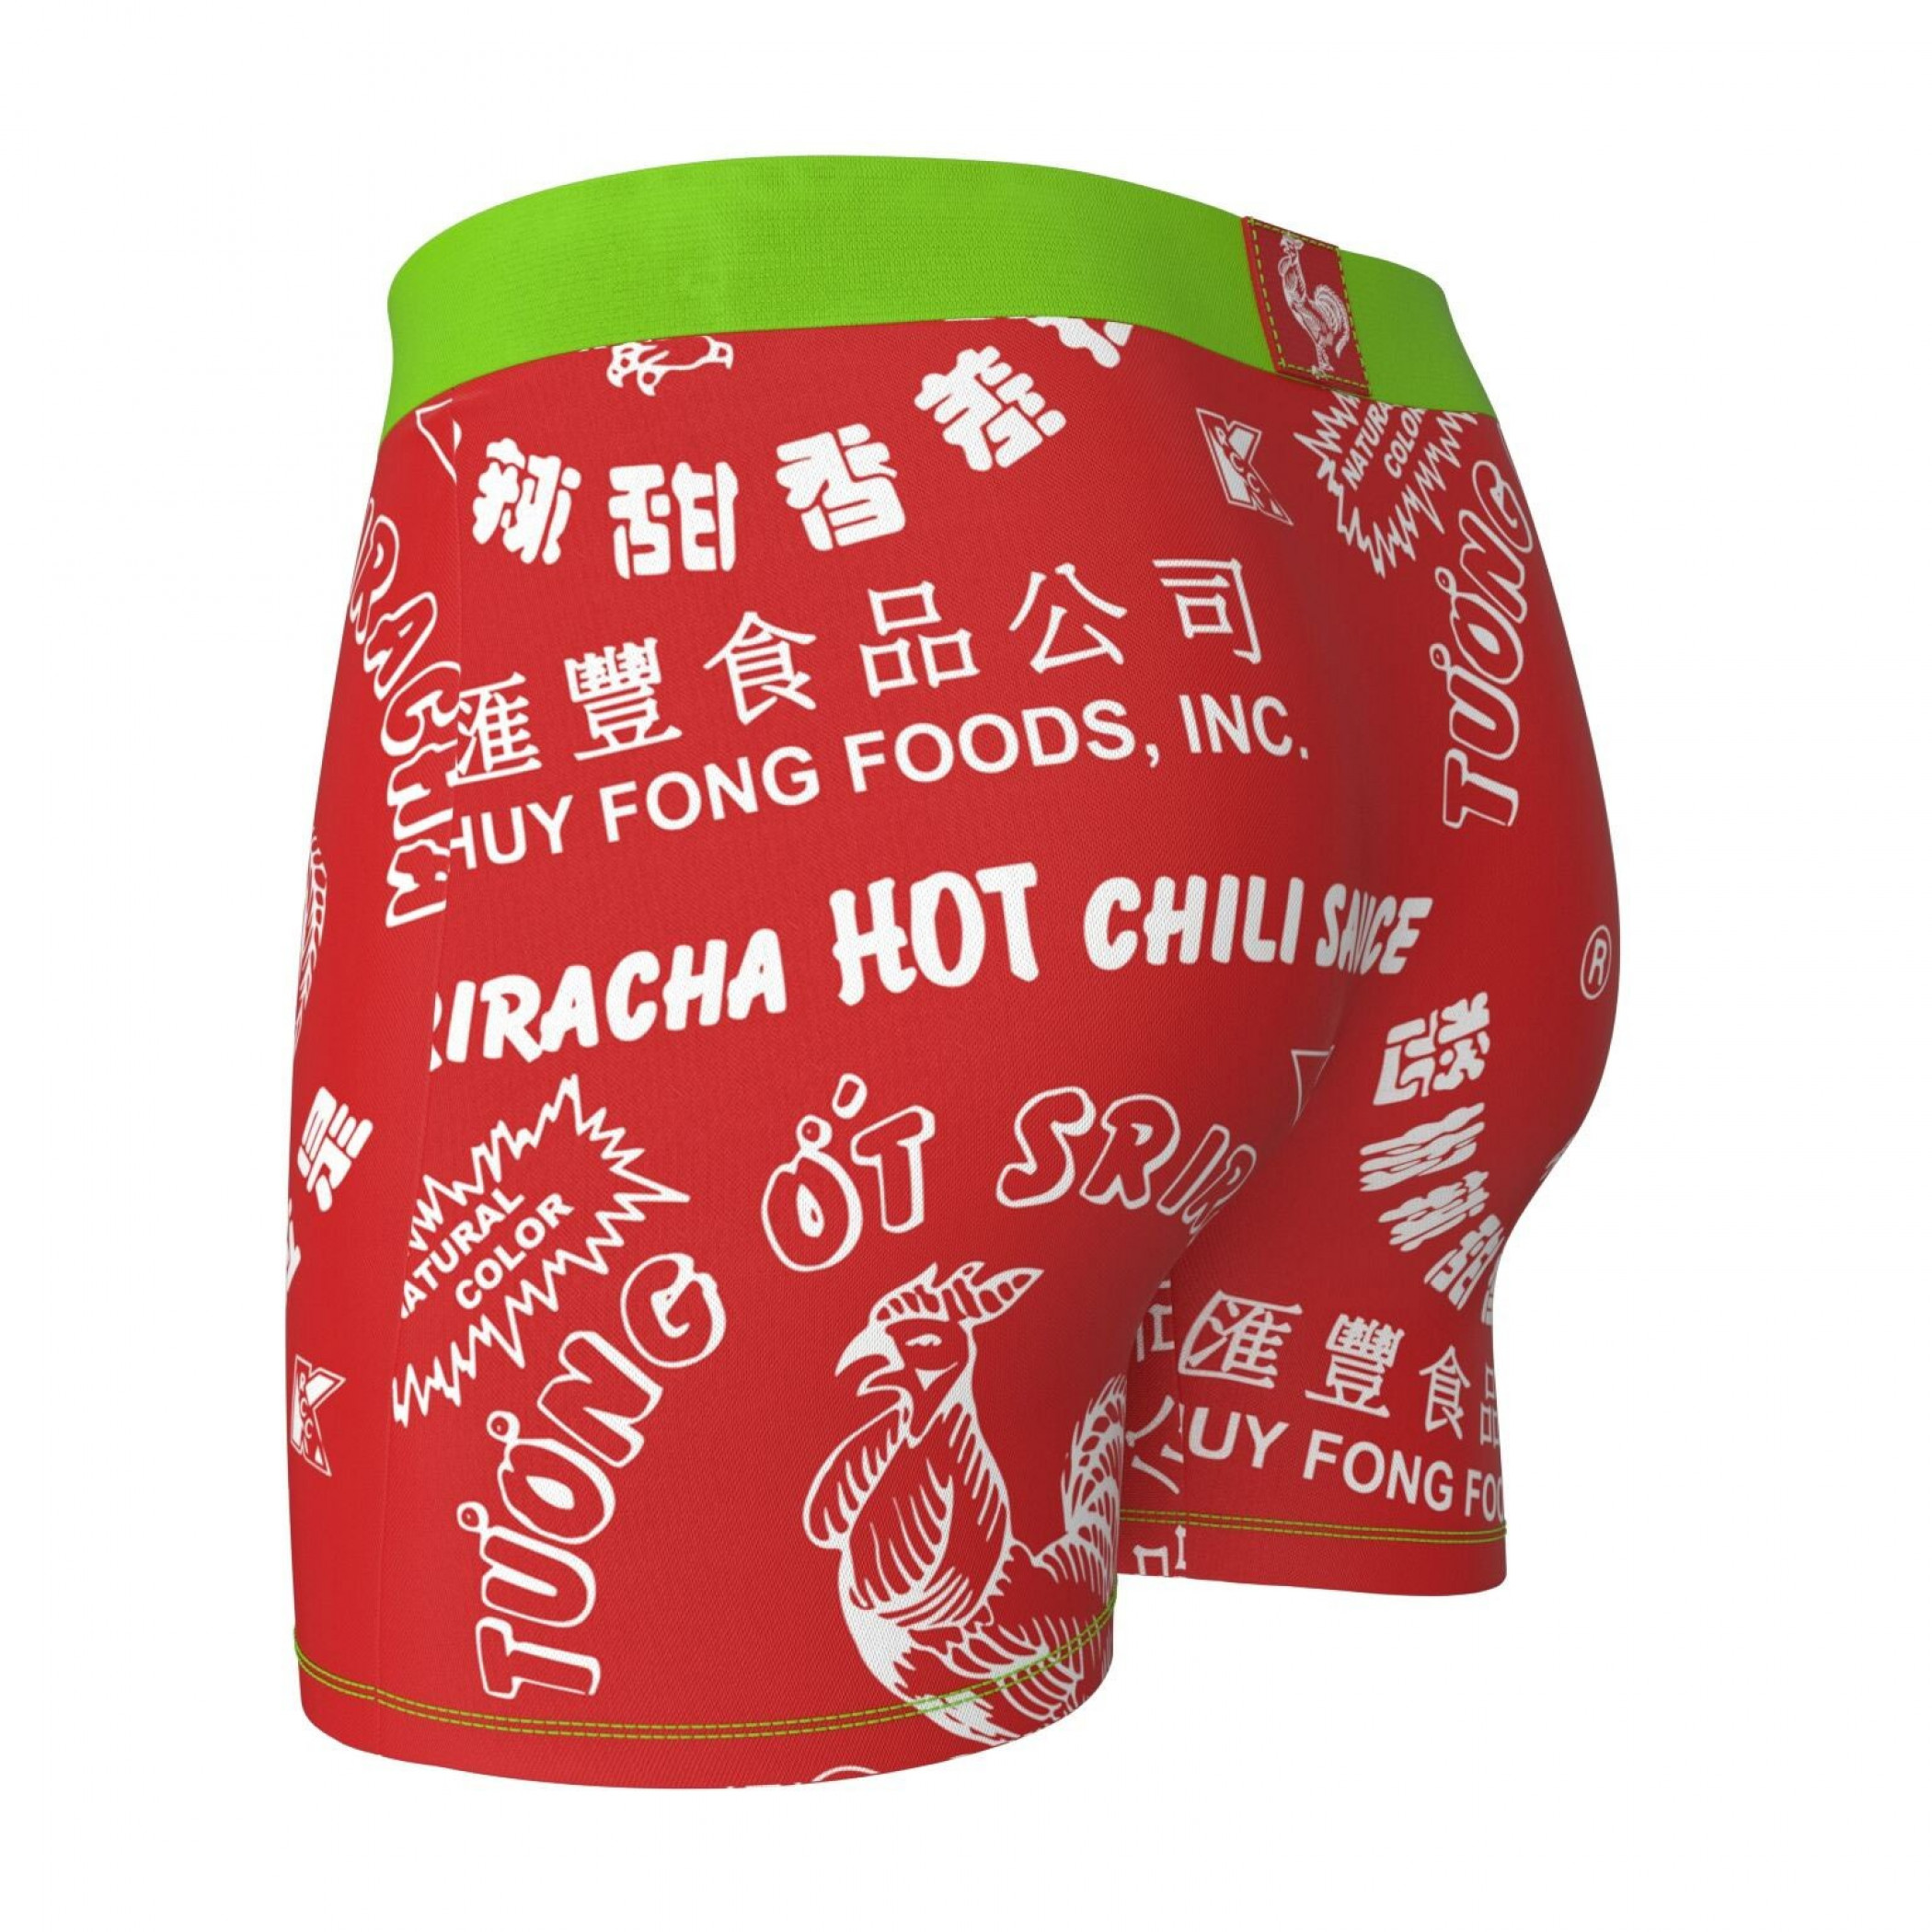 Sriracha Hot Chili Sauce Boxer Briefs in Chinese Take Out Container-XLarge - image 5 of 6